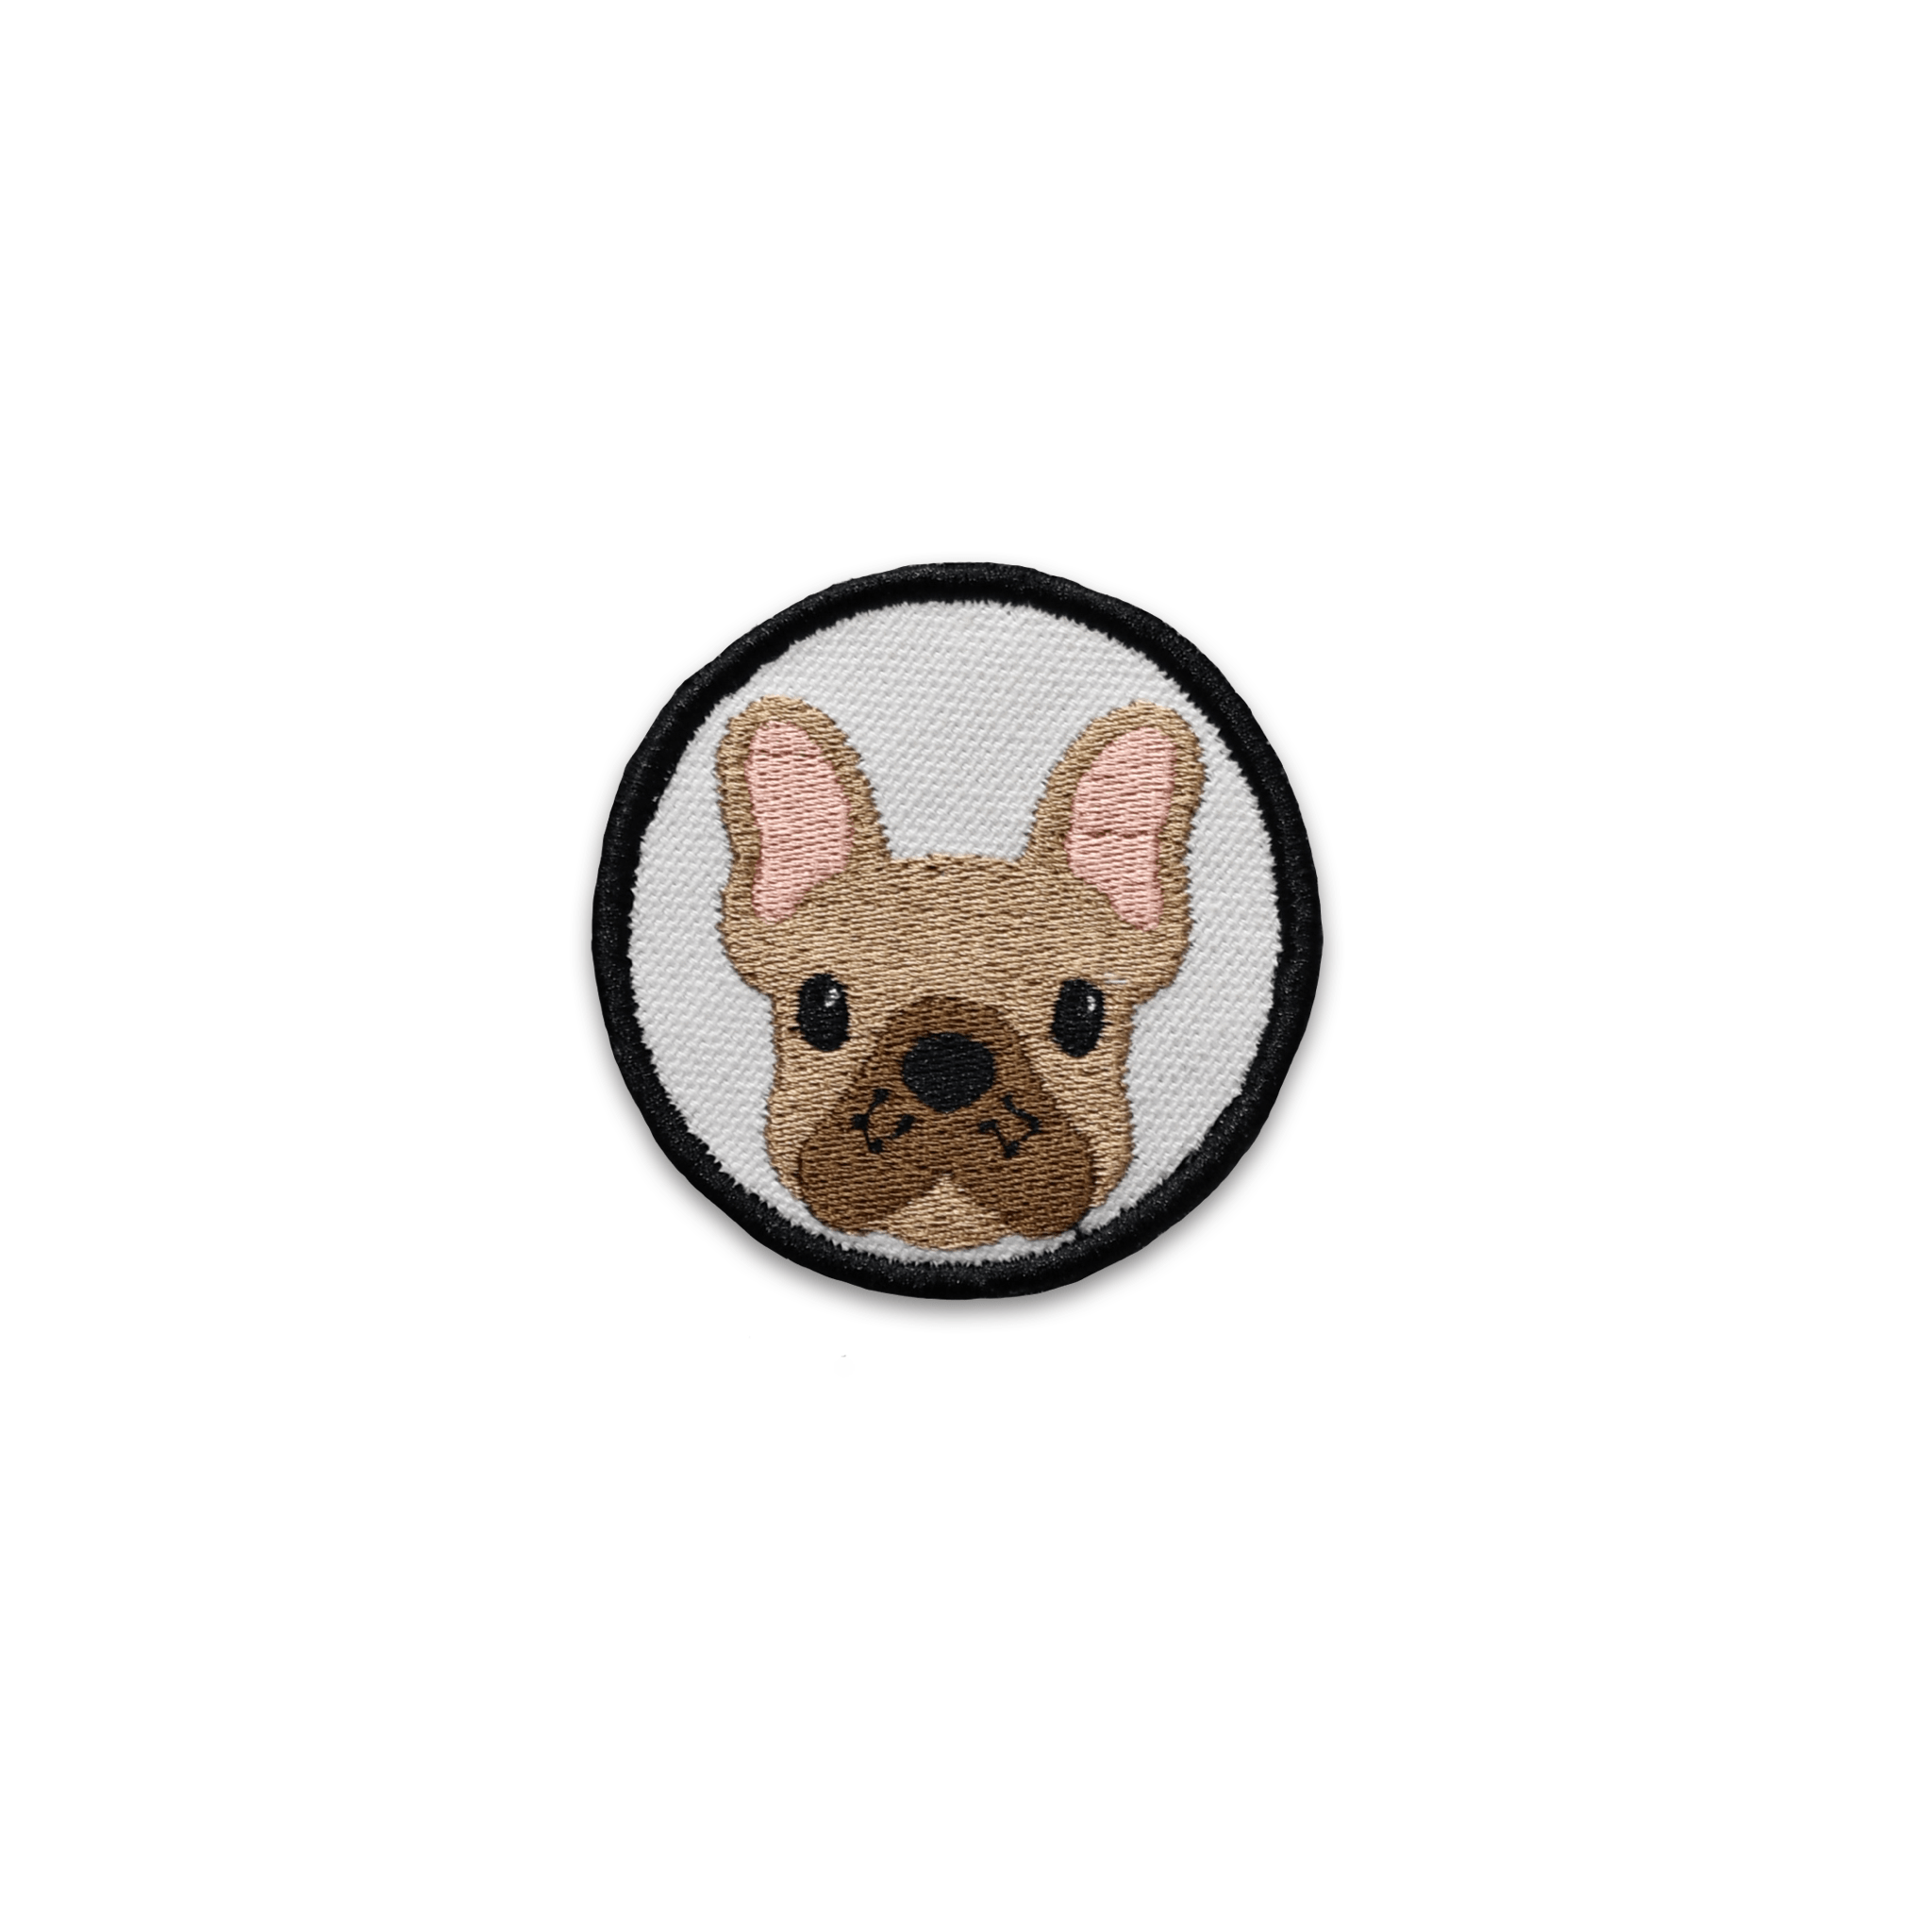 White-Frenchie Dog Patches